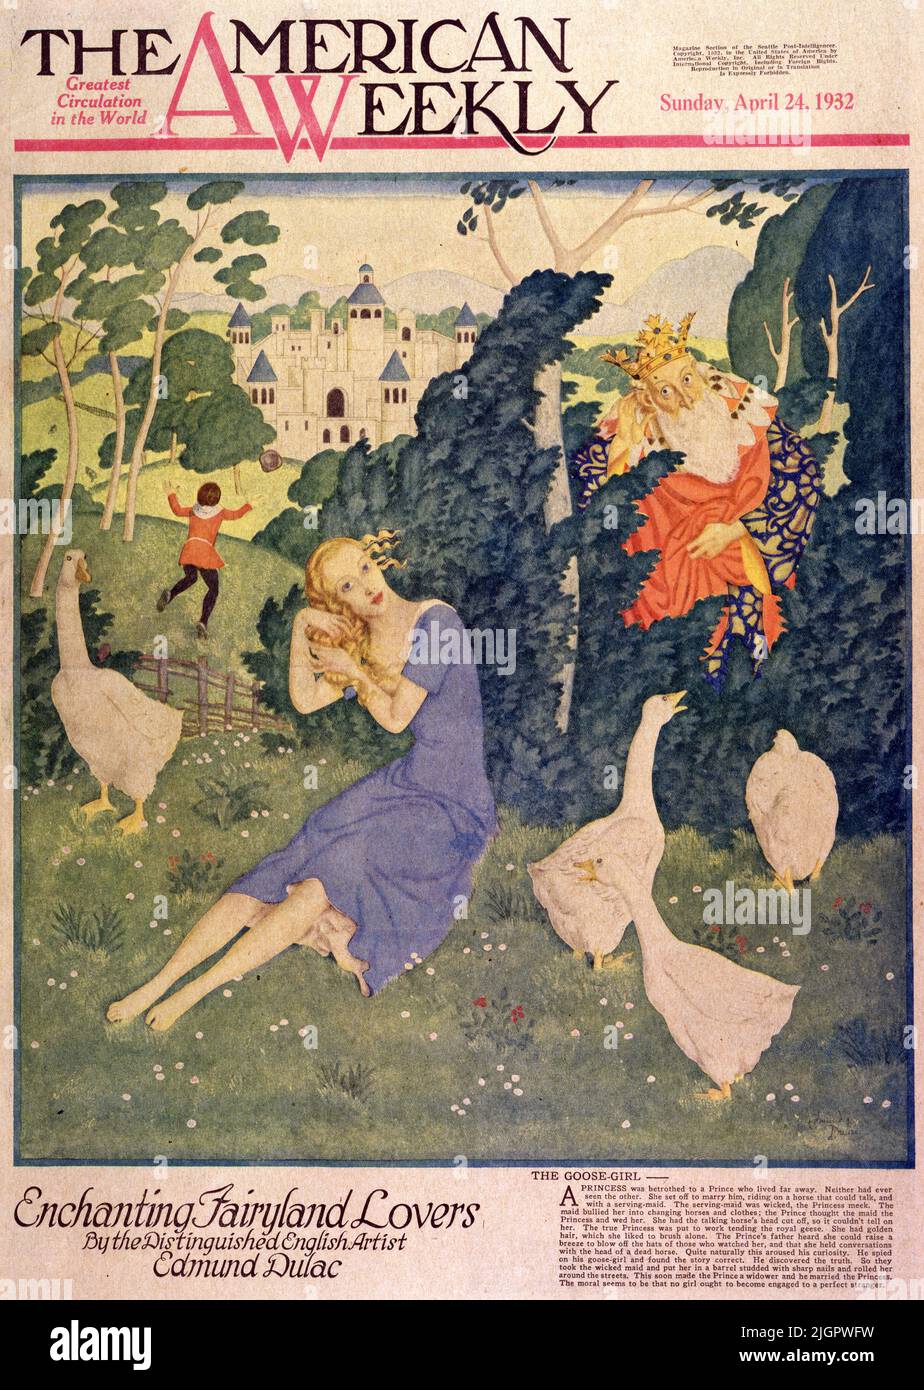 'The Goose Girl' published April 24,1932 in the American Weekly Sunday magazine painted by Edmund Dulac.A Princess was bethroughed to a Prince who lived far away. Neither had ever seen each other. She set off to marry him, riding on a horse that could talk, and with a serving maid. The serving maid was wicked, the Princess meek. The maid bullied her into changing horses and clothes; the Prince thought the maid (was) the Princess and wed her. She had the talking horses’ head cut off, so he couldn’t tell on her. The true Princess was put to work tending the royal geese. She had golden hair... Stock Photo